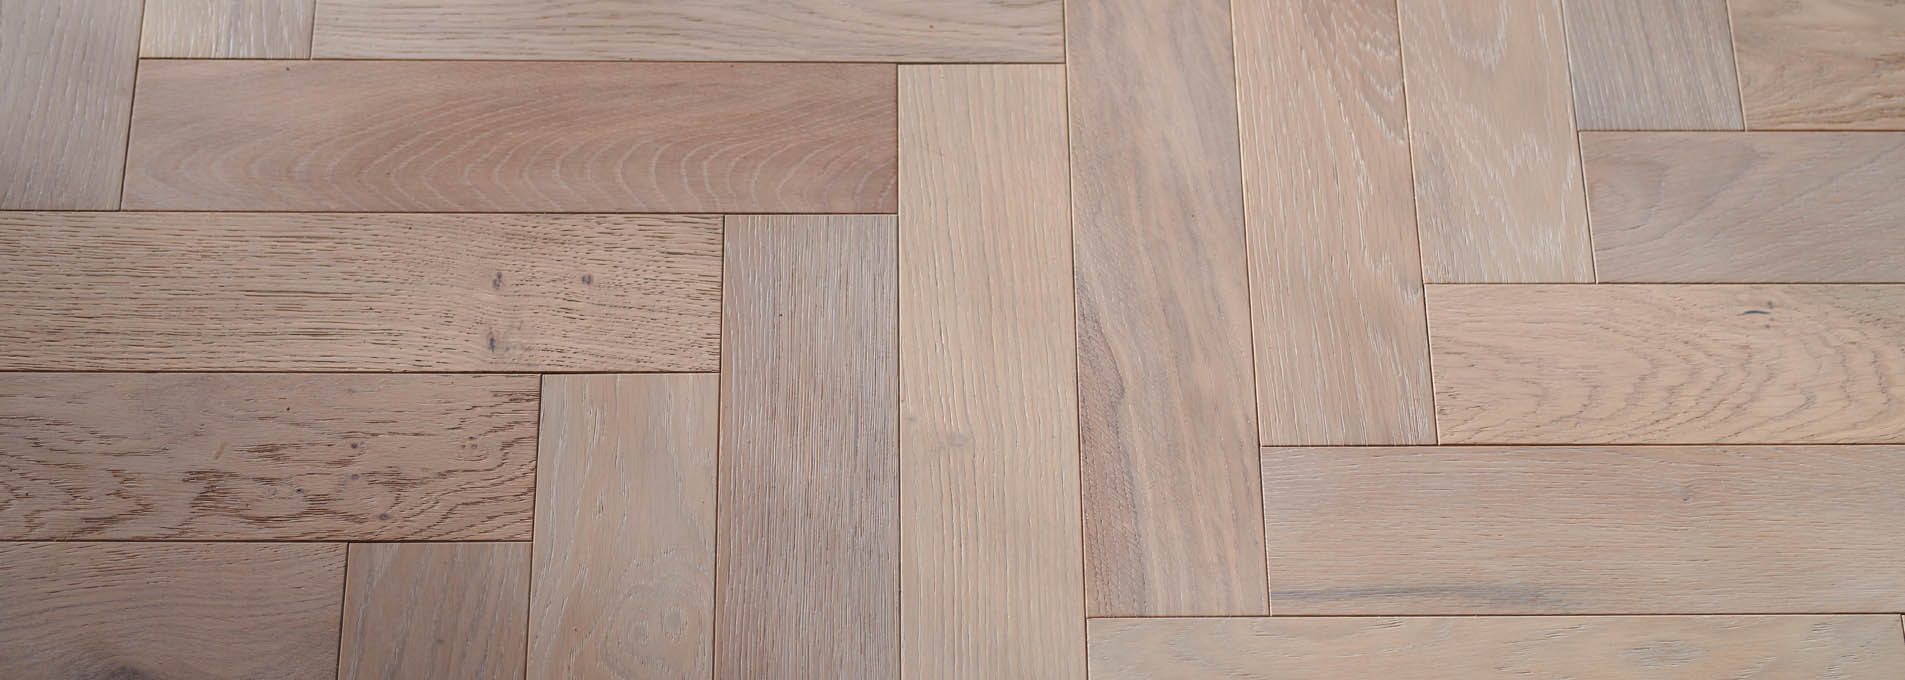 Best Engineered Wood Flooring for Your Home - The Home Depot